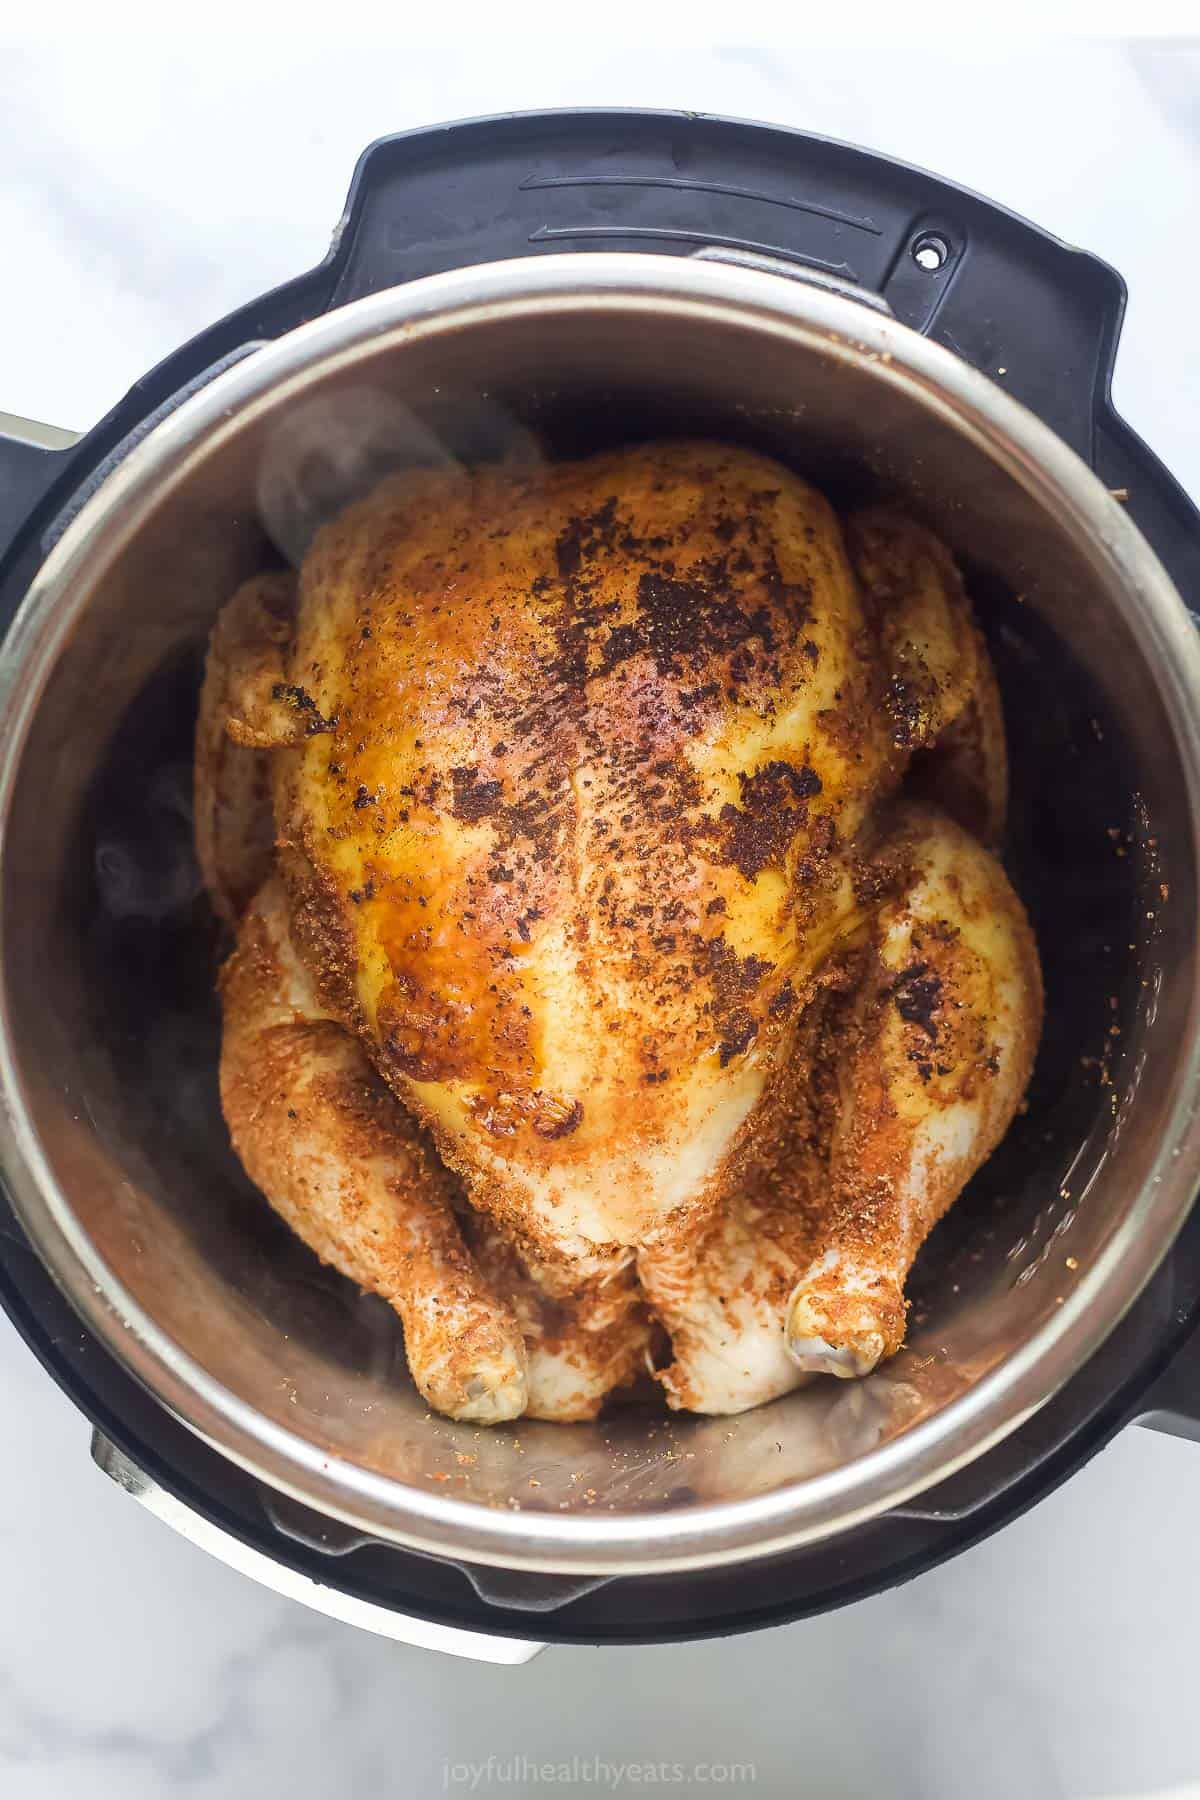 a whole chicken seared in a stainless steel pot